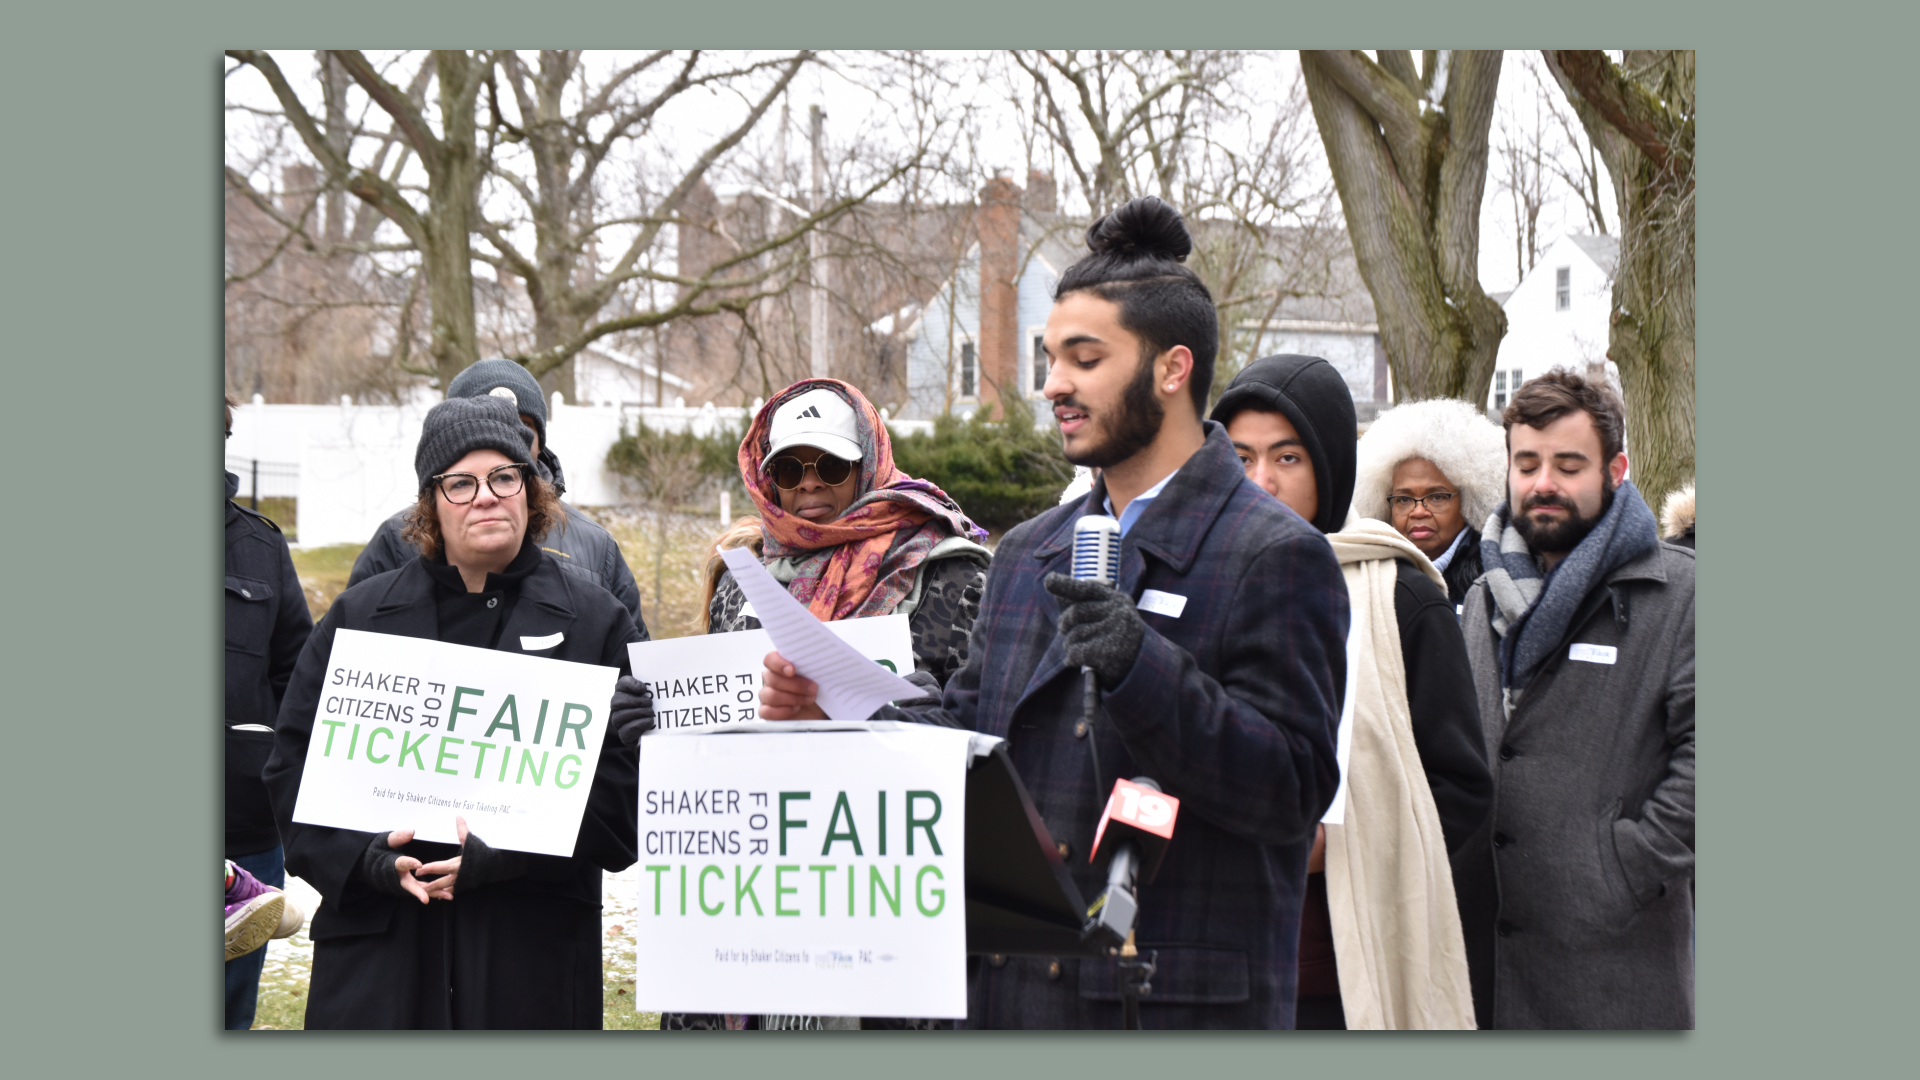 Teen organizer Ethan Khorana speaks at a microphone on a winter day, with crowd behind him